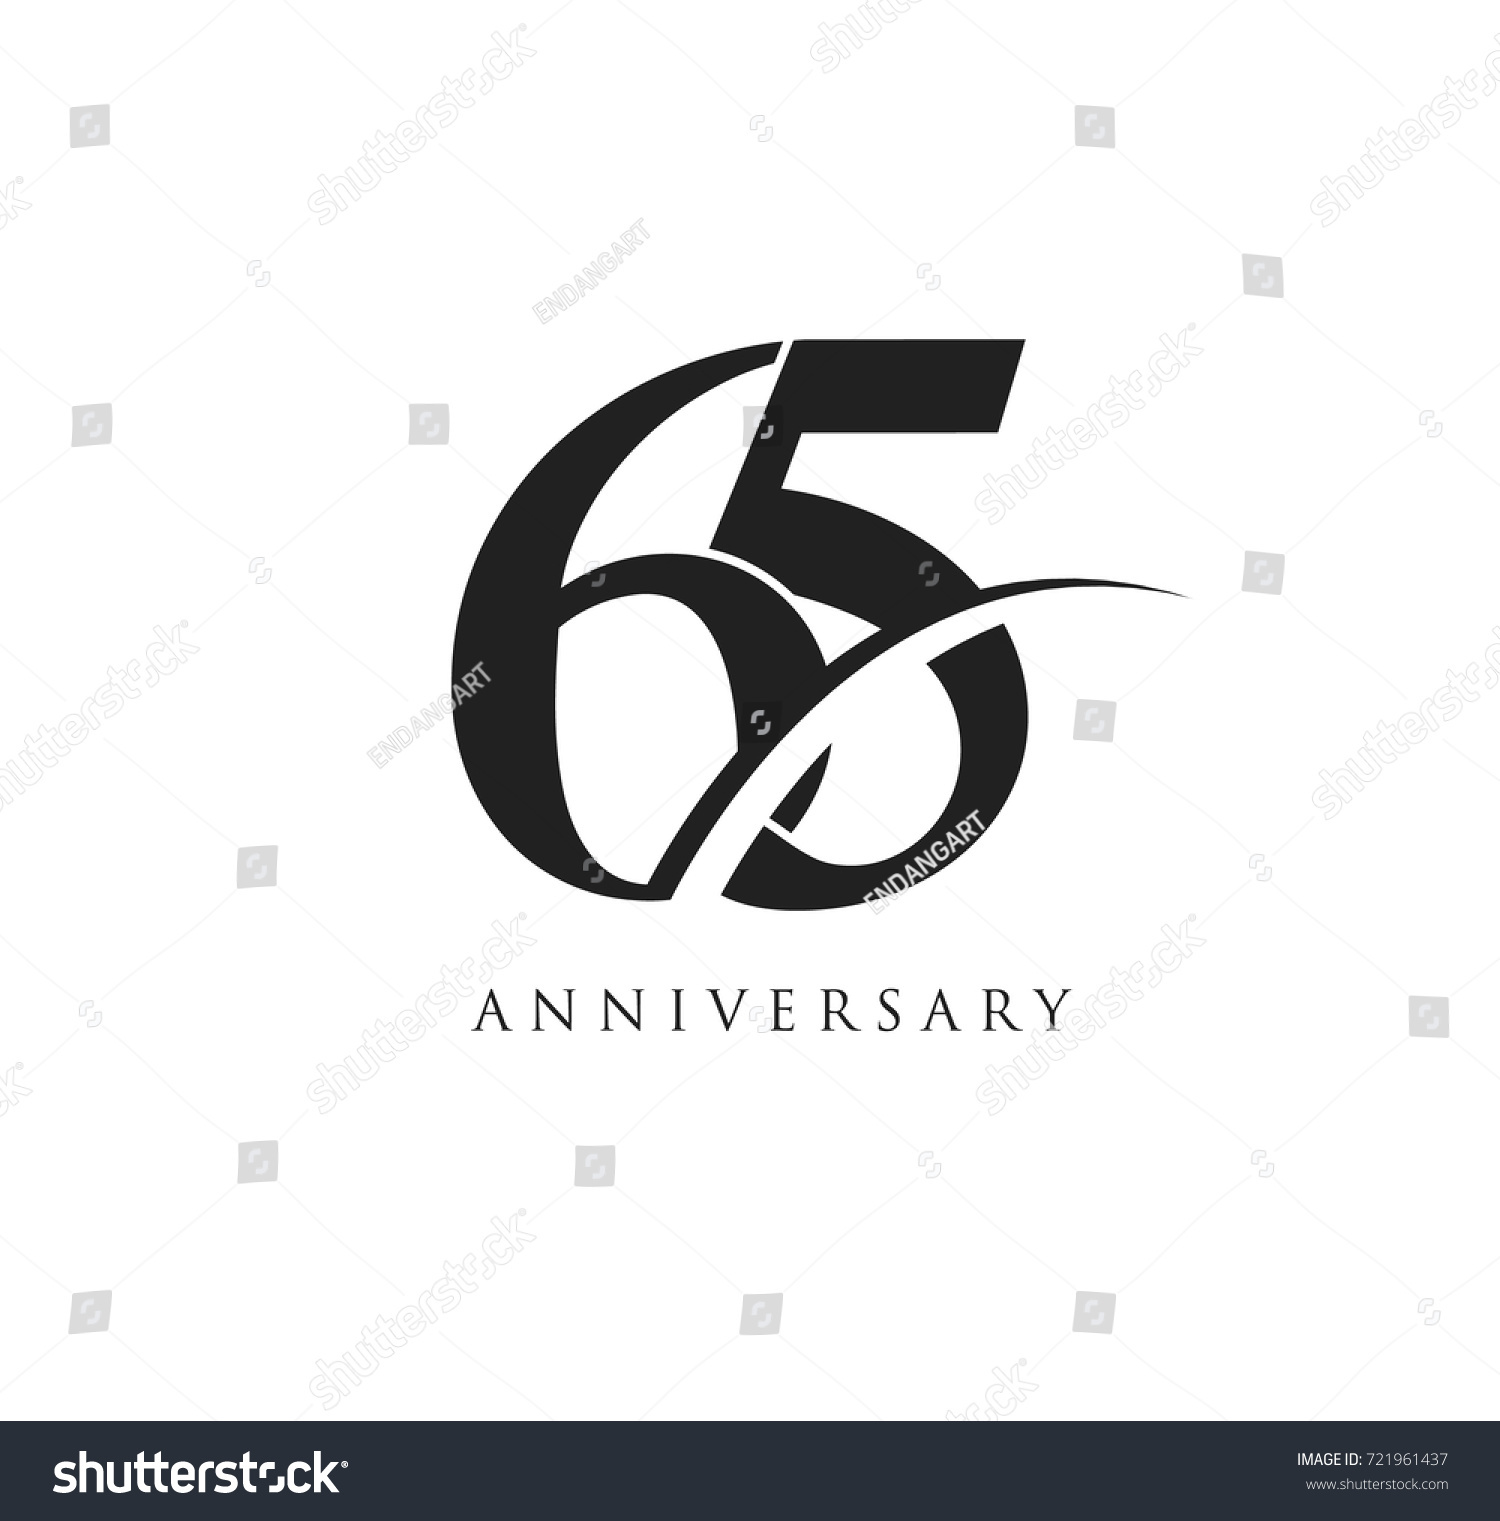 65 Years Anniversary Pictogram Vector Icon Stock Vector (Royalty Free ...